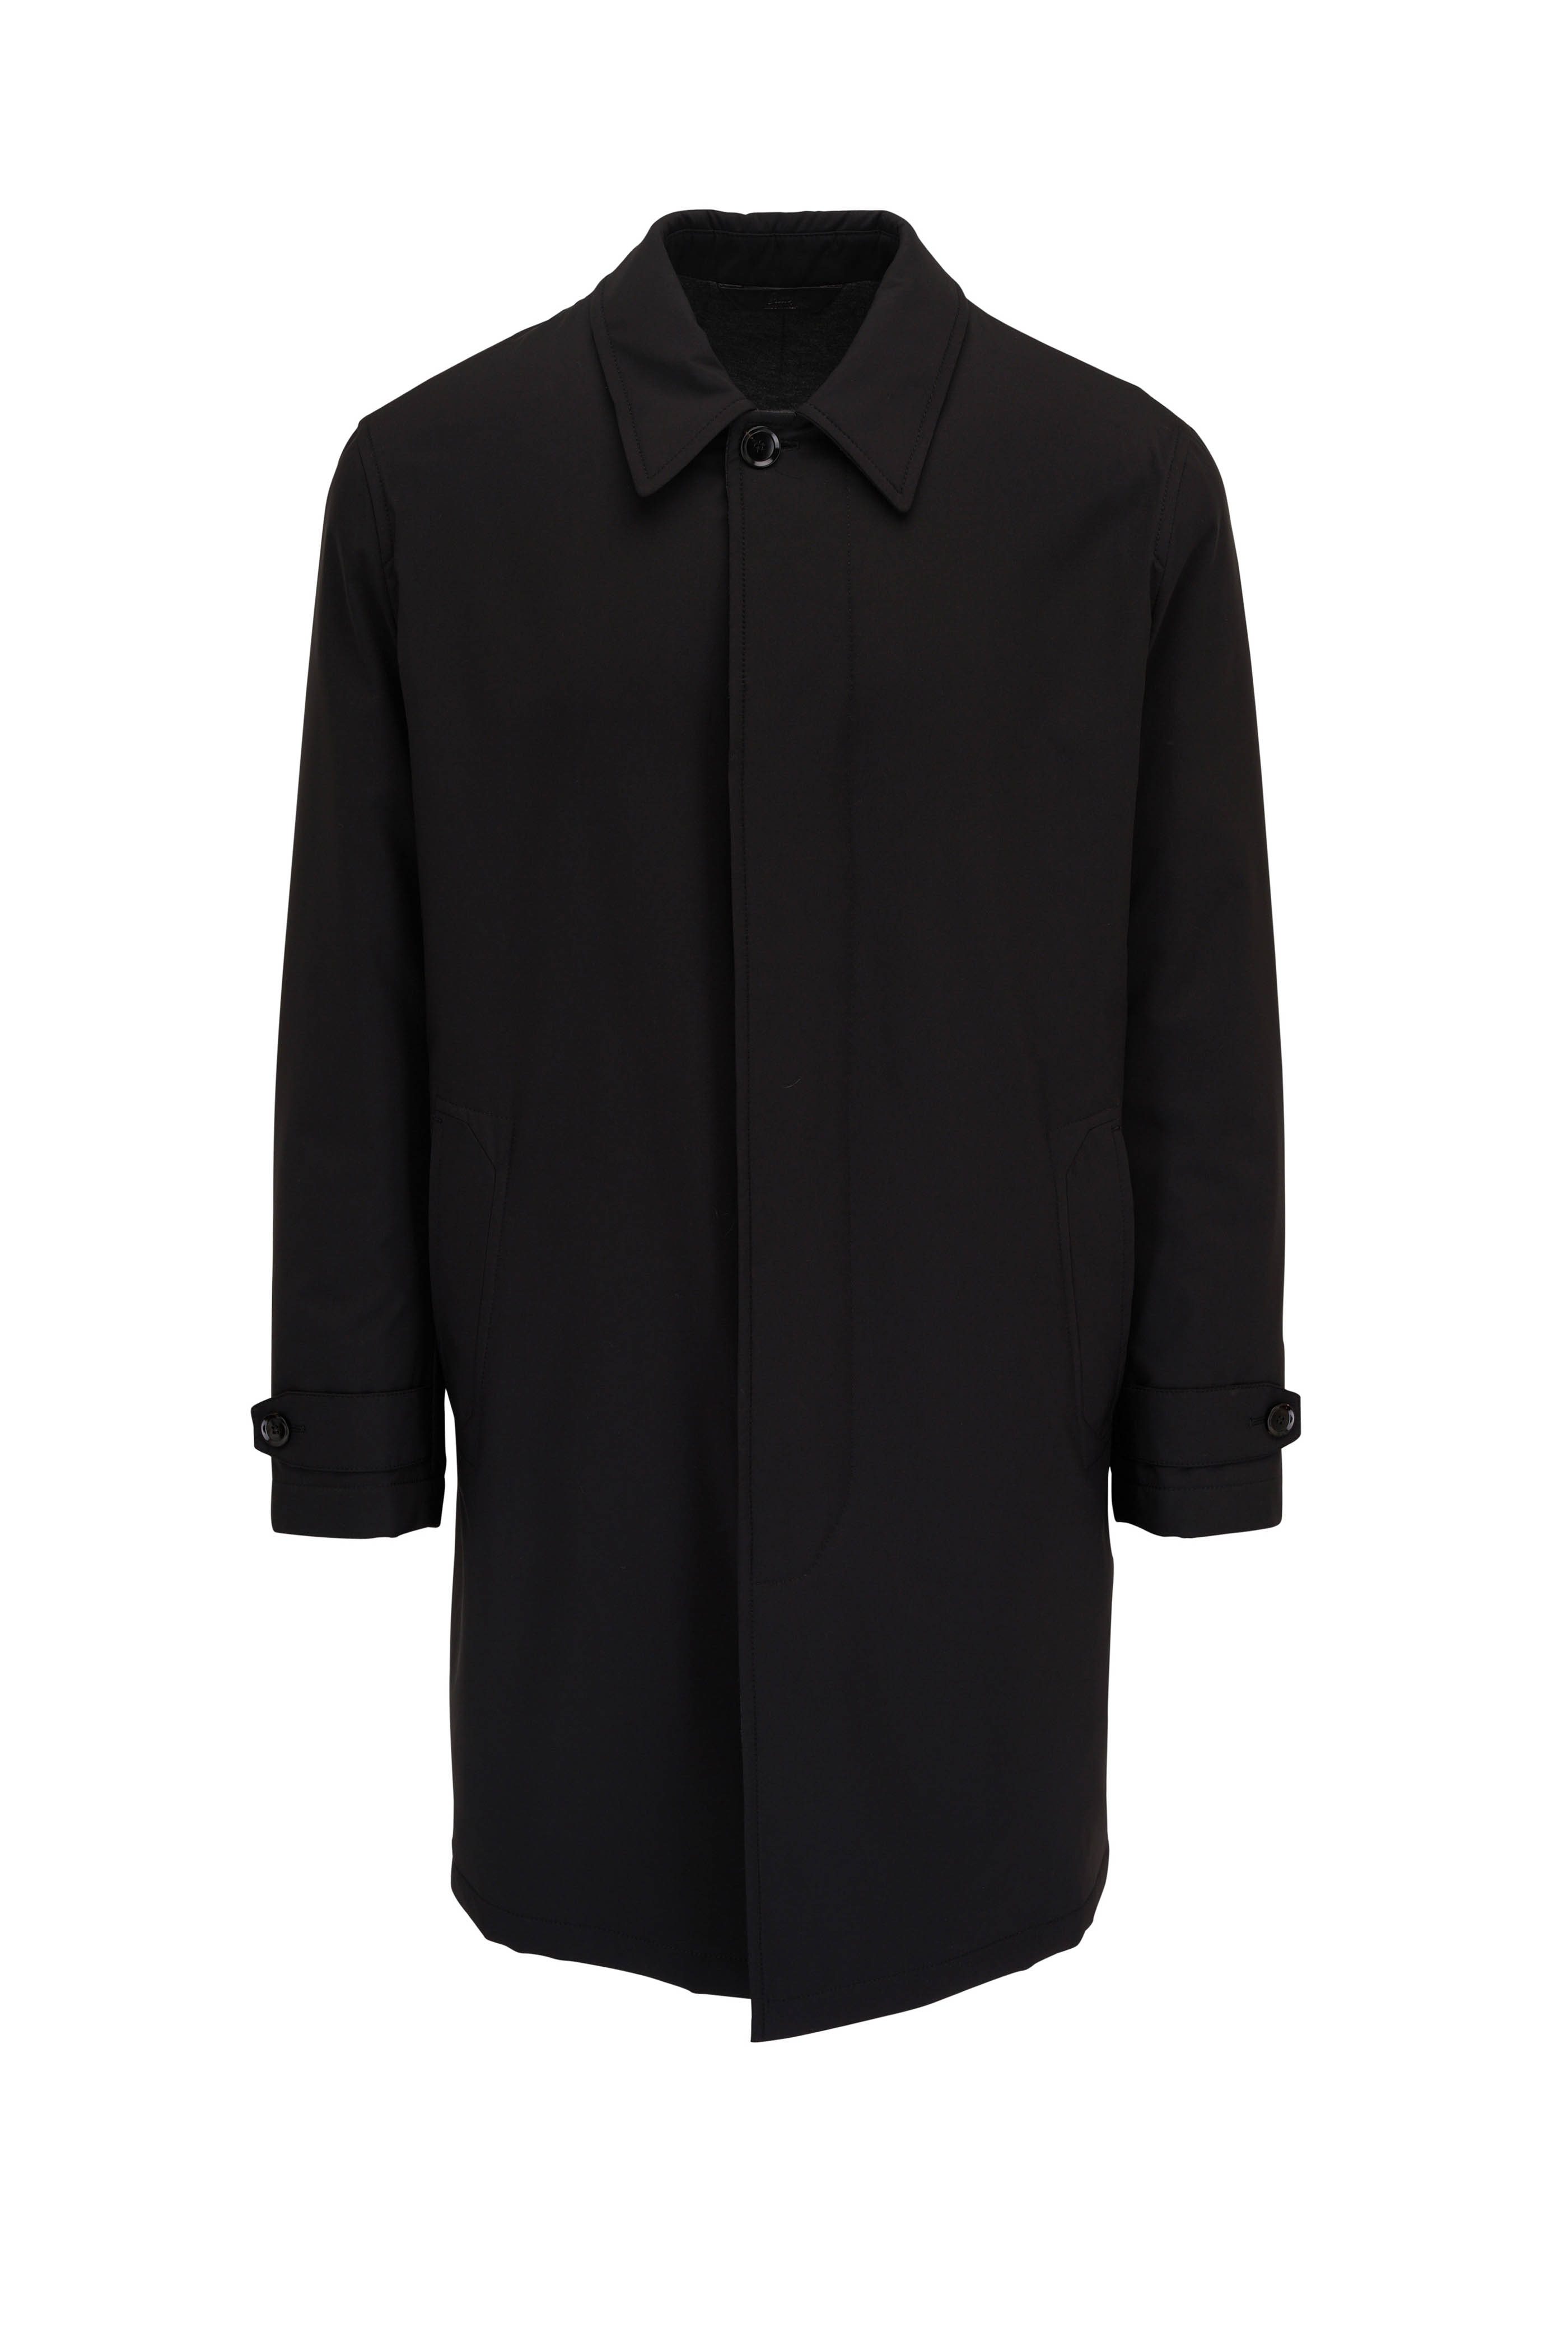 Brioni - Midnight Blue Wool & Cashmere Top Coat | Mitchell Stores